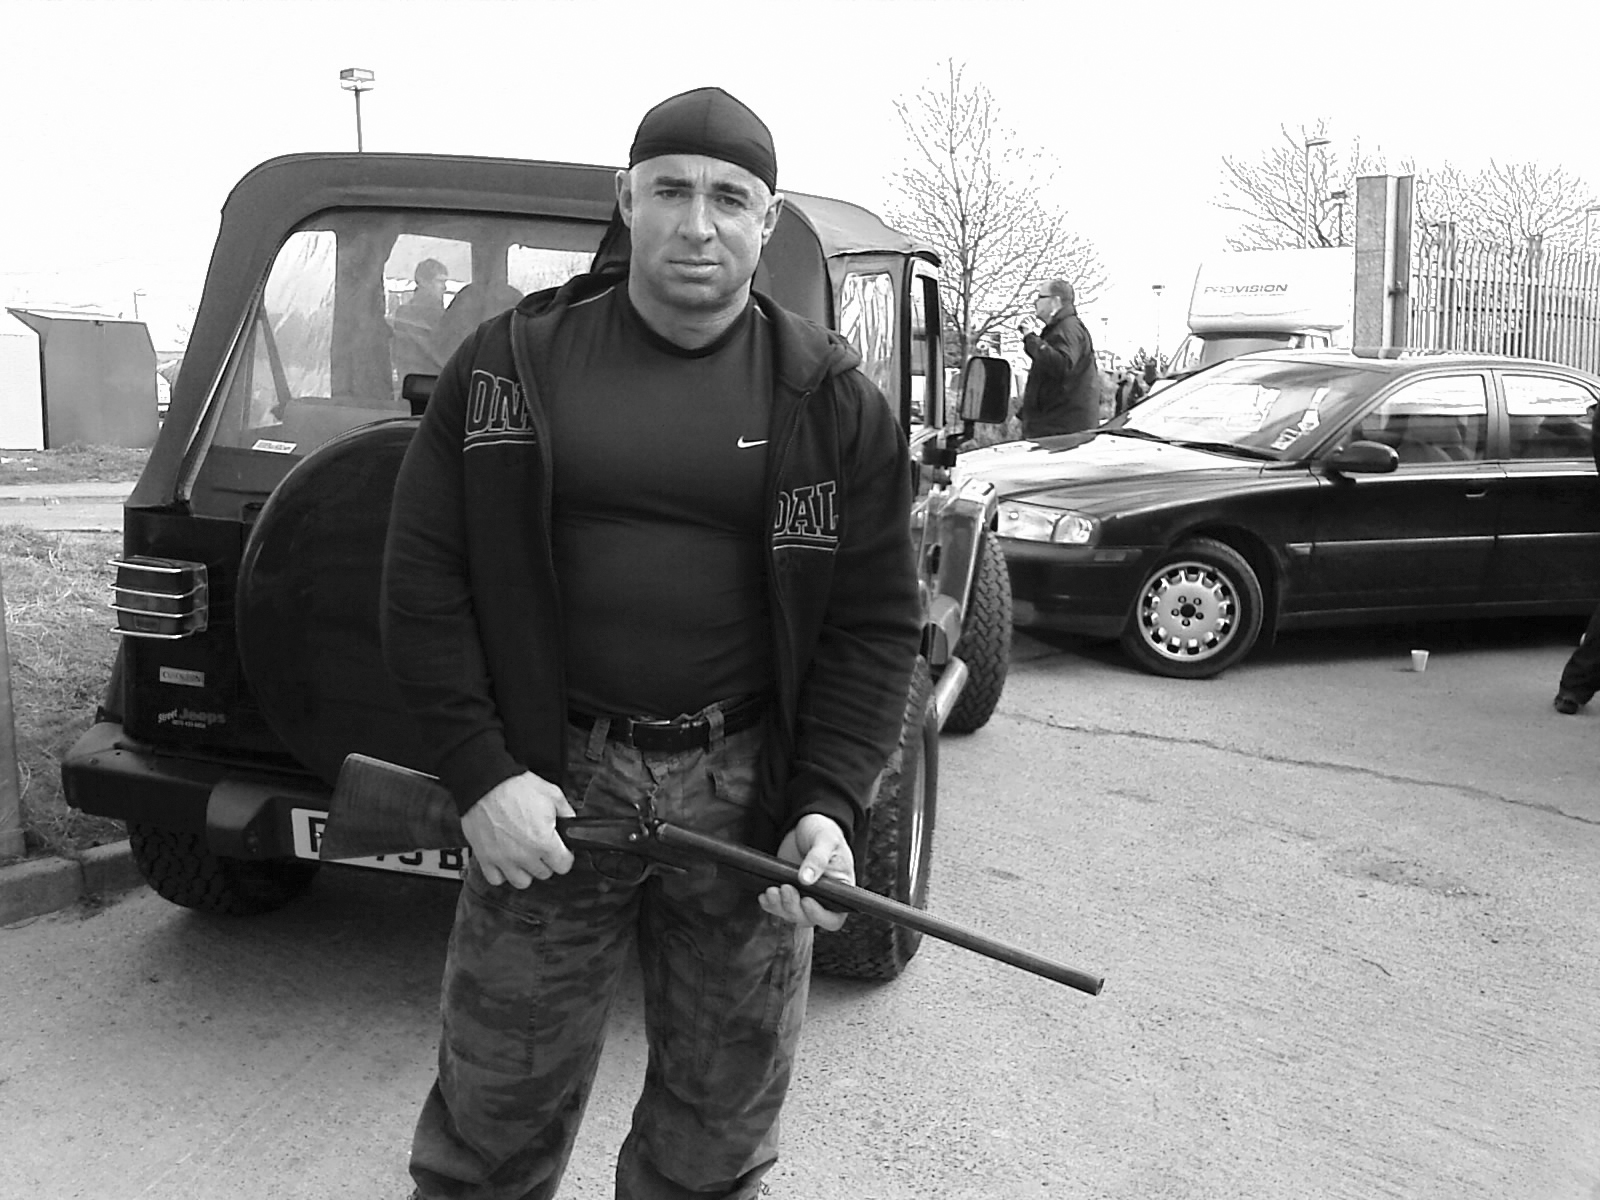 On the set of 'Freight' Feb 2009